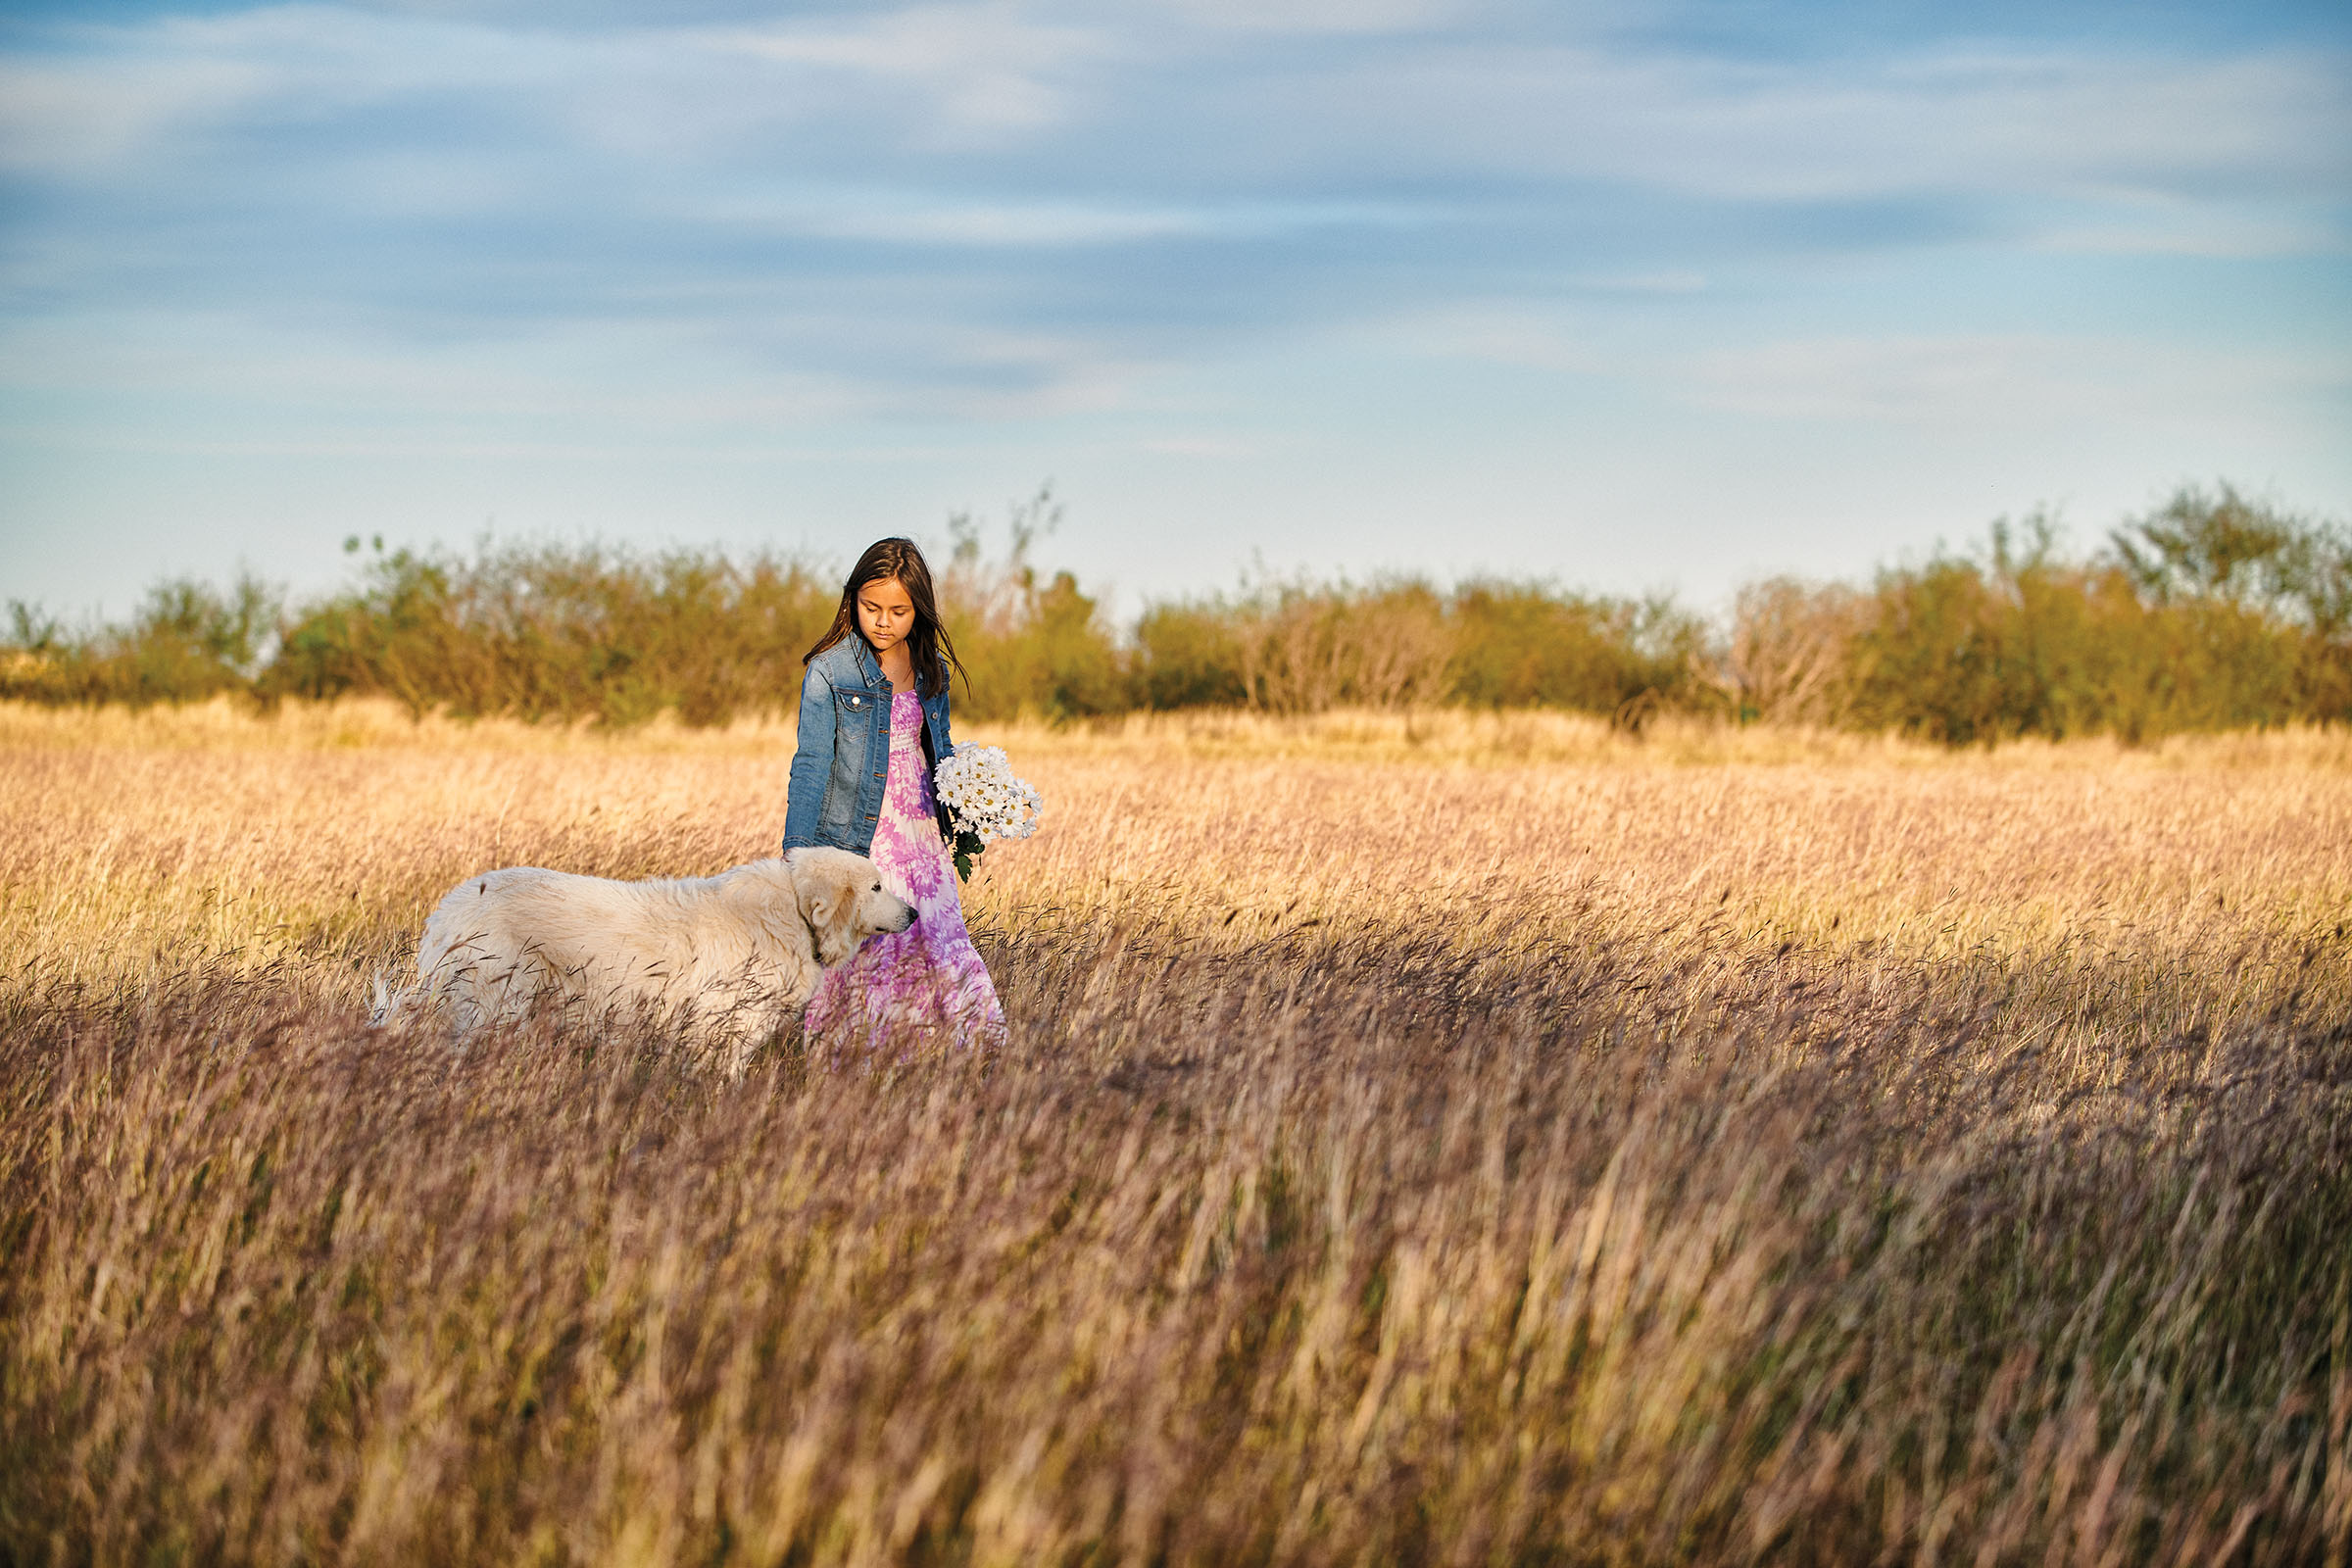 A young woman walks a large blonde dog through a field of tall grasses